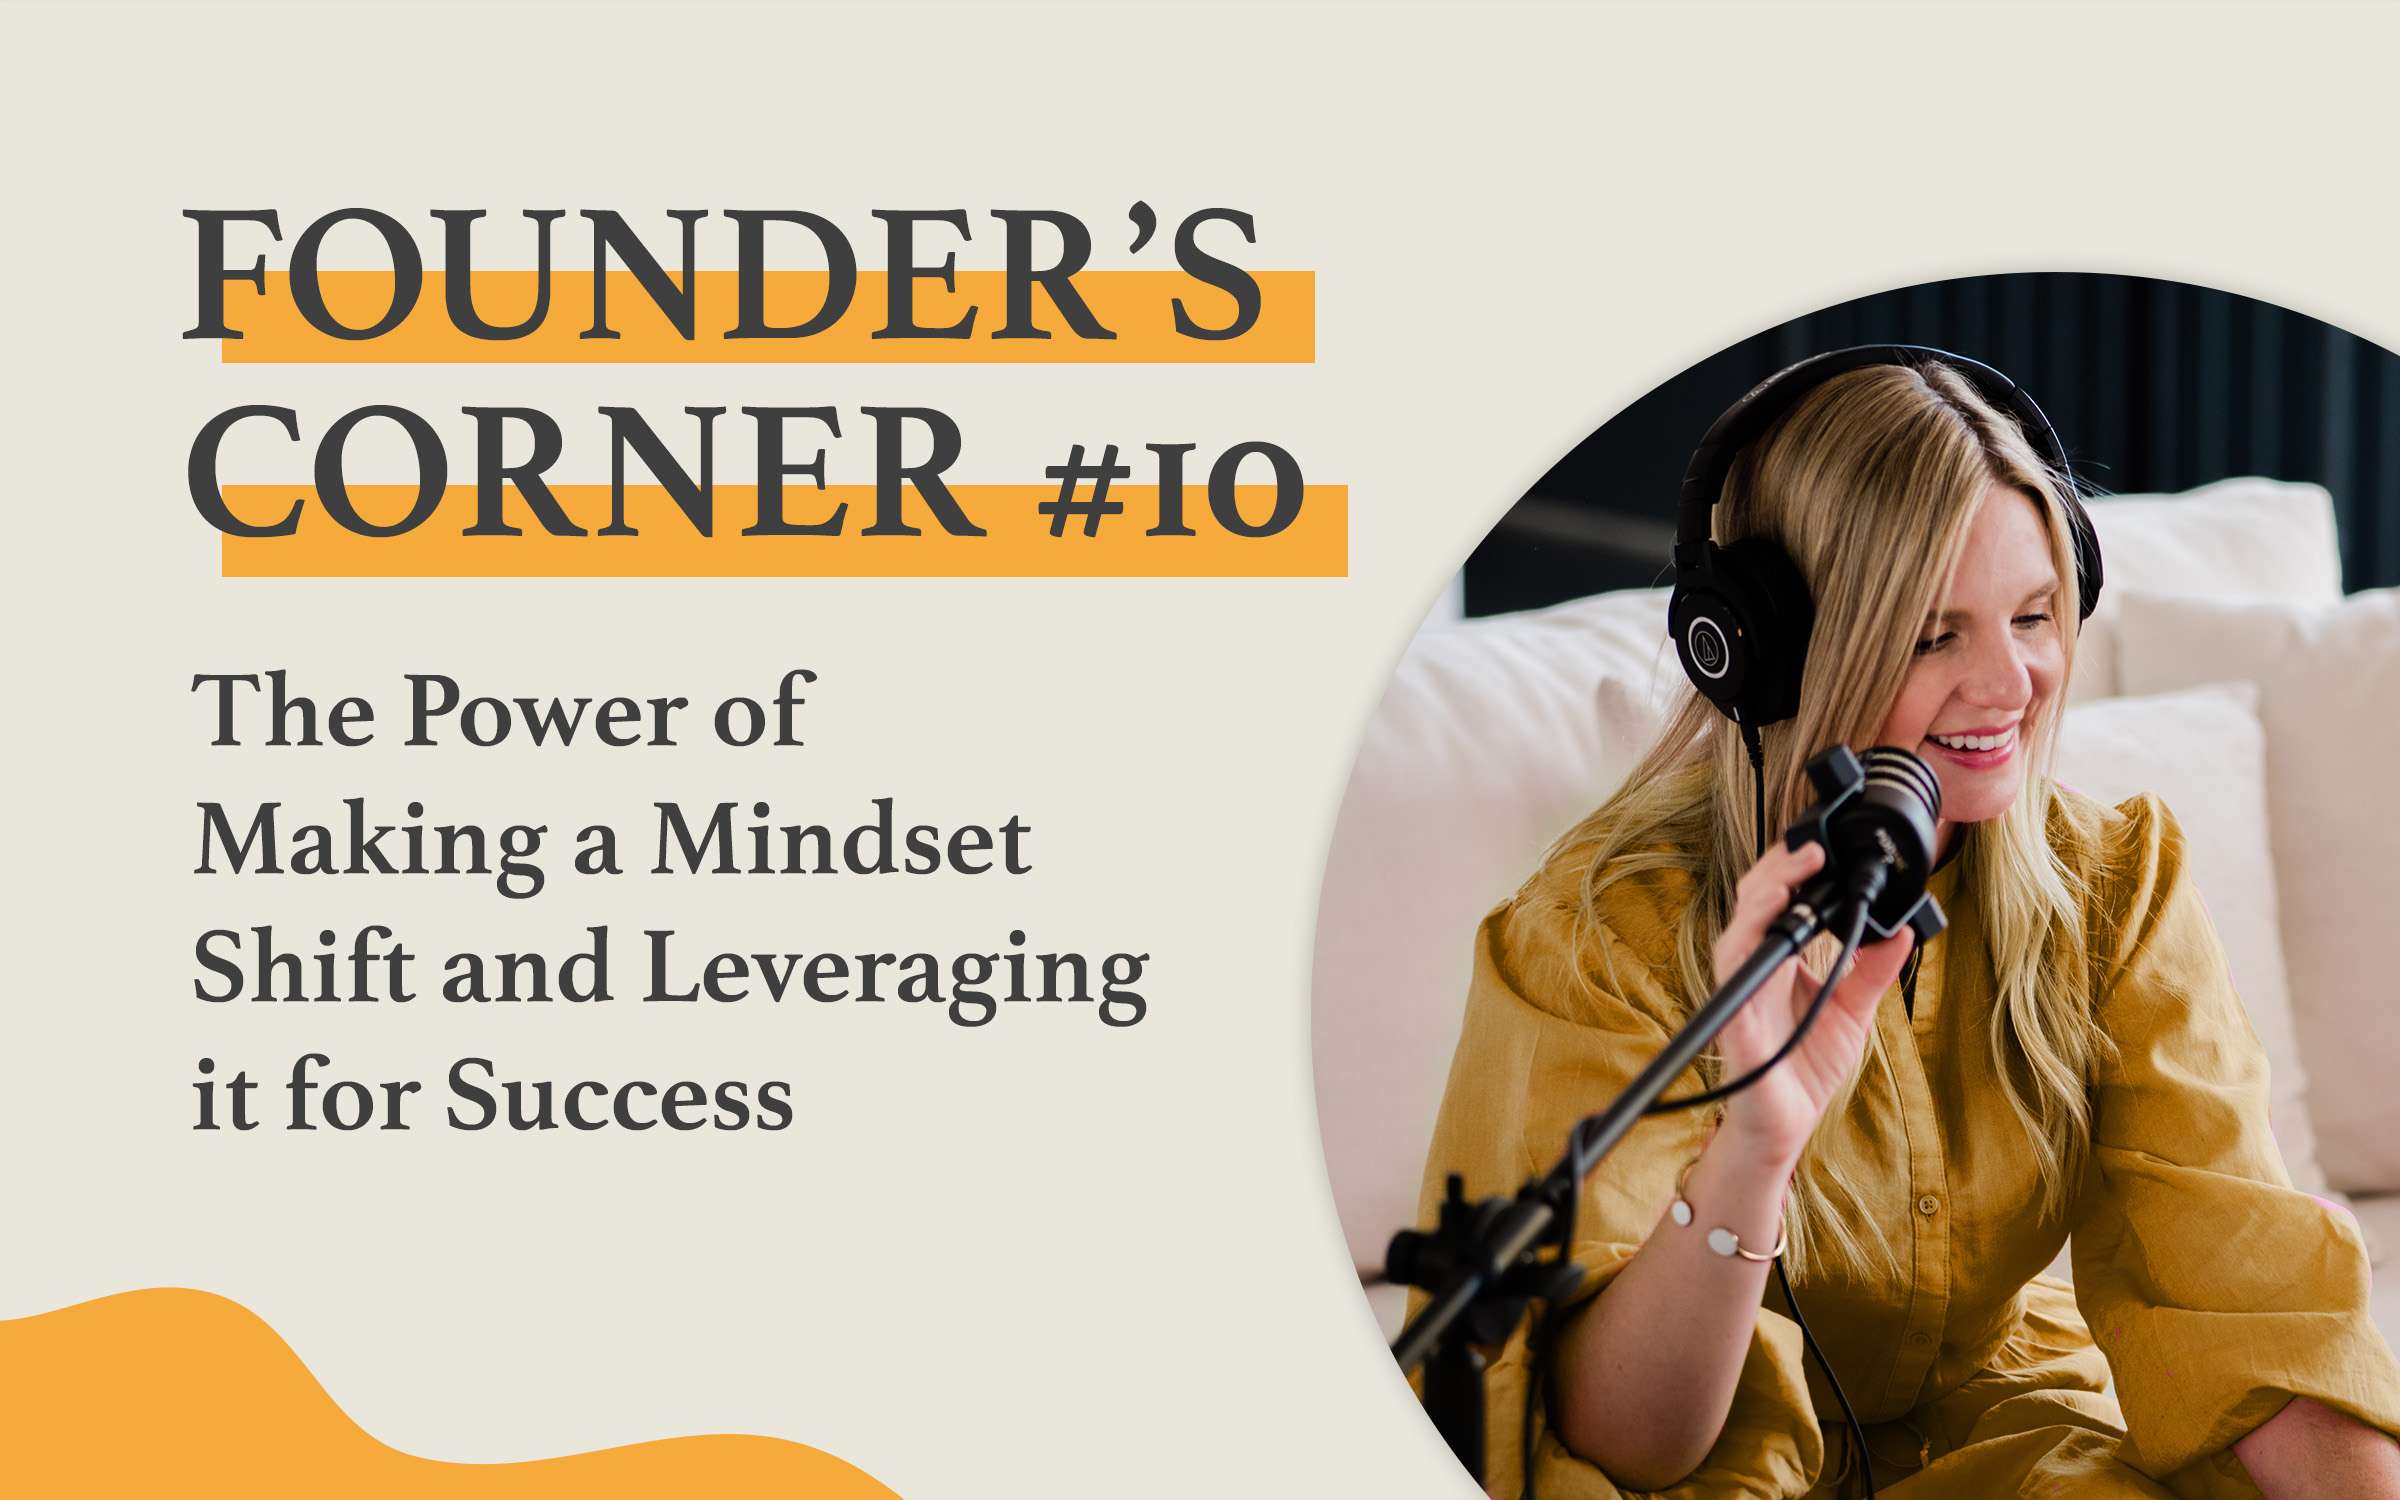 Founder's Corner #10 The Power of a Mindset Shift and Leveraging it for Success